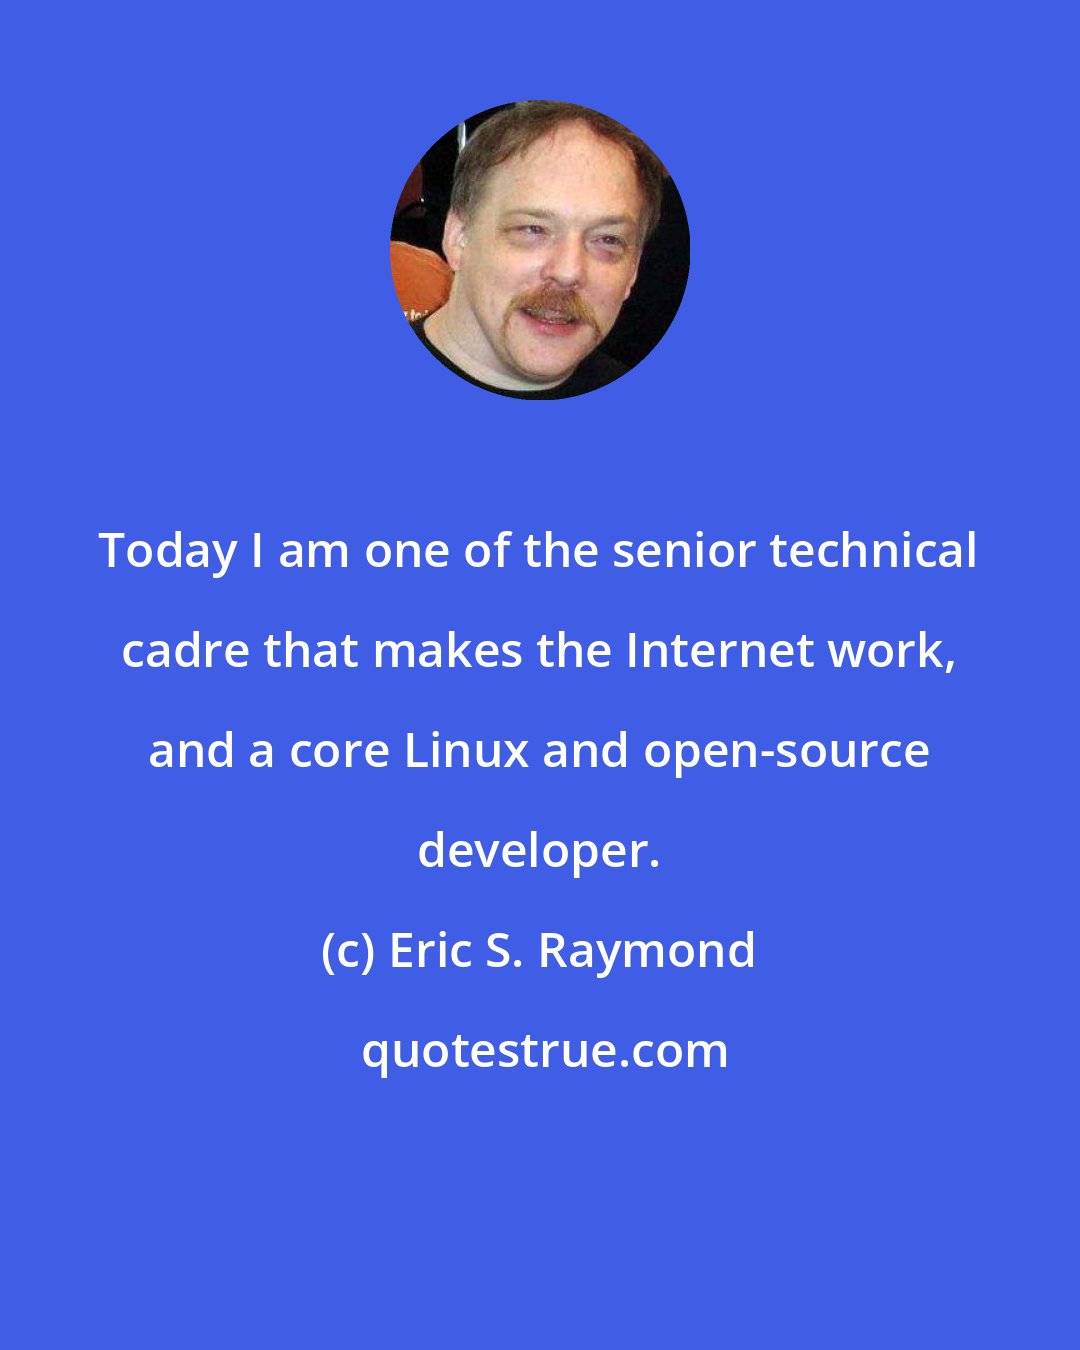 Eric S. Raymond: Today I am one of the senior technical cadre that makes the Internet work, and a core Linux and open-source developer.